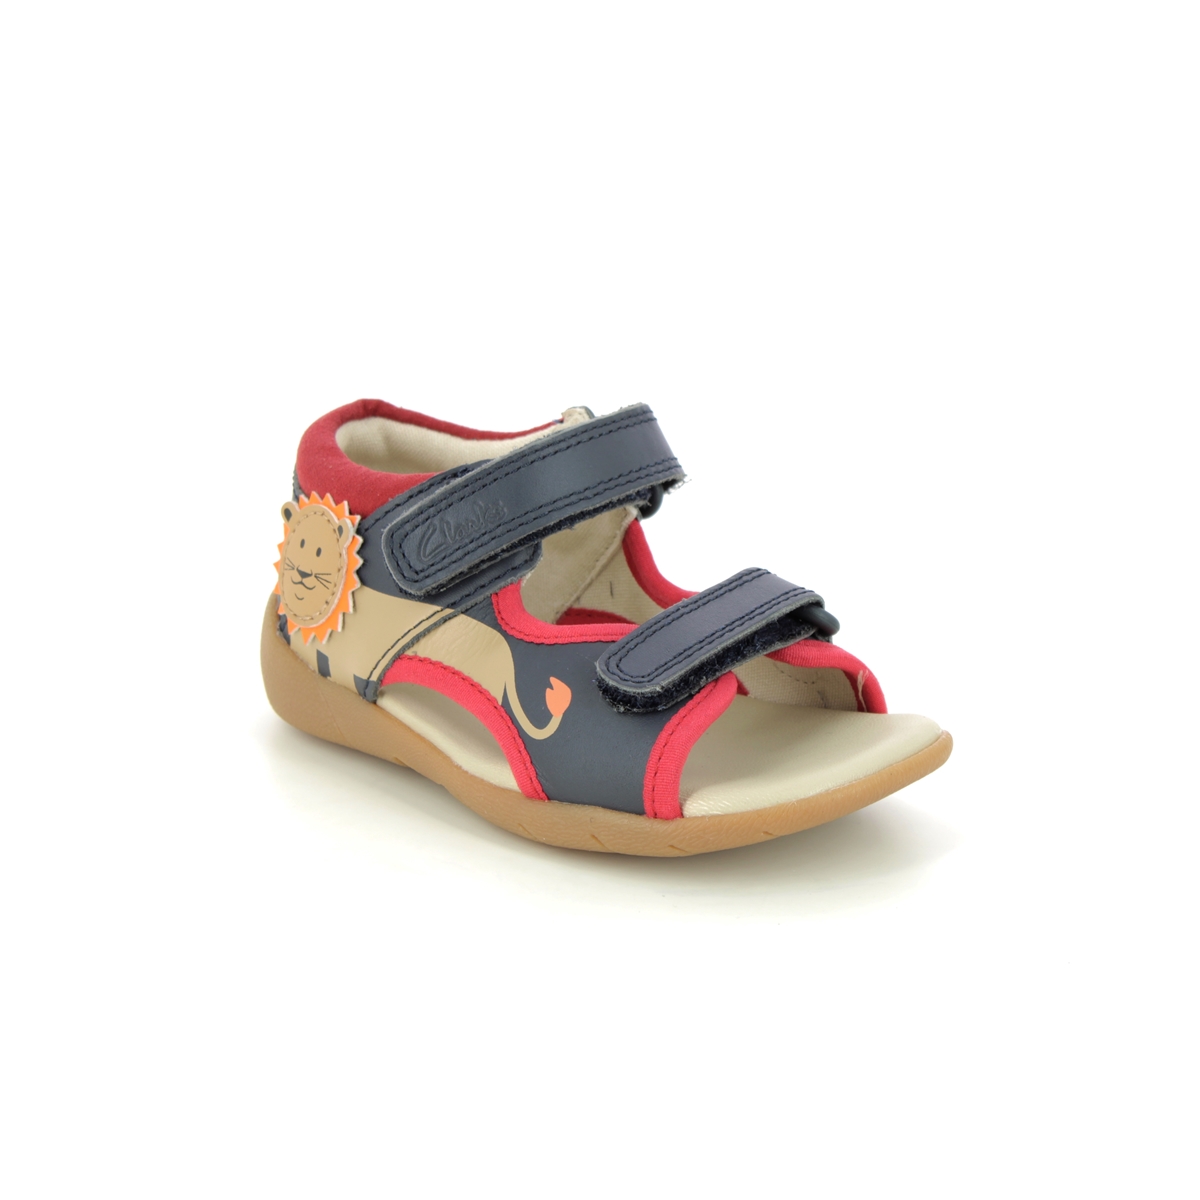 Clarks Zora Jungle T Navy Leather Kids Boys Sandals 646216F In Size 5.5 In Plain Navy Leather F Width Fitting Regular Fit For kids